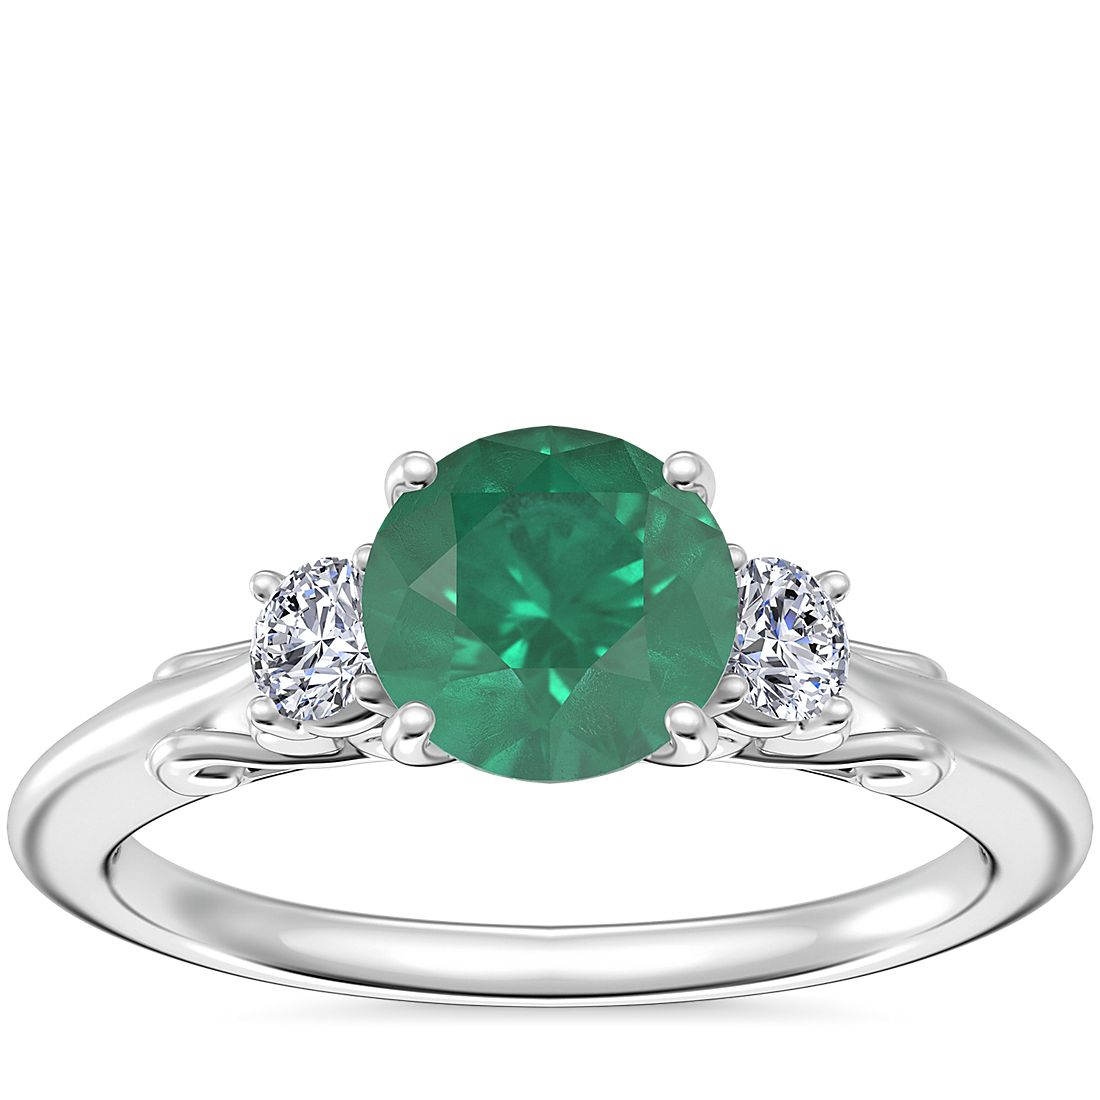 Vintage Three Stone Engagement Ring with Round Emerald in 18k White Gold (6.5mm)